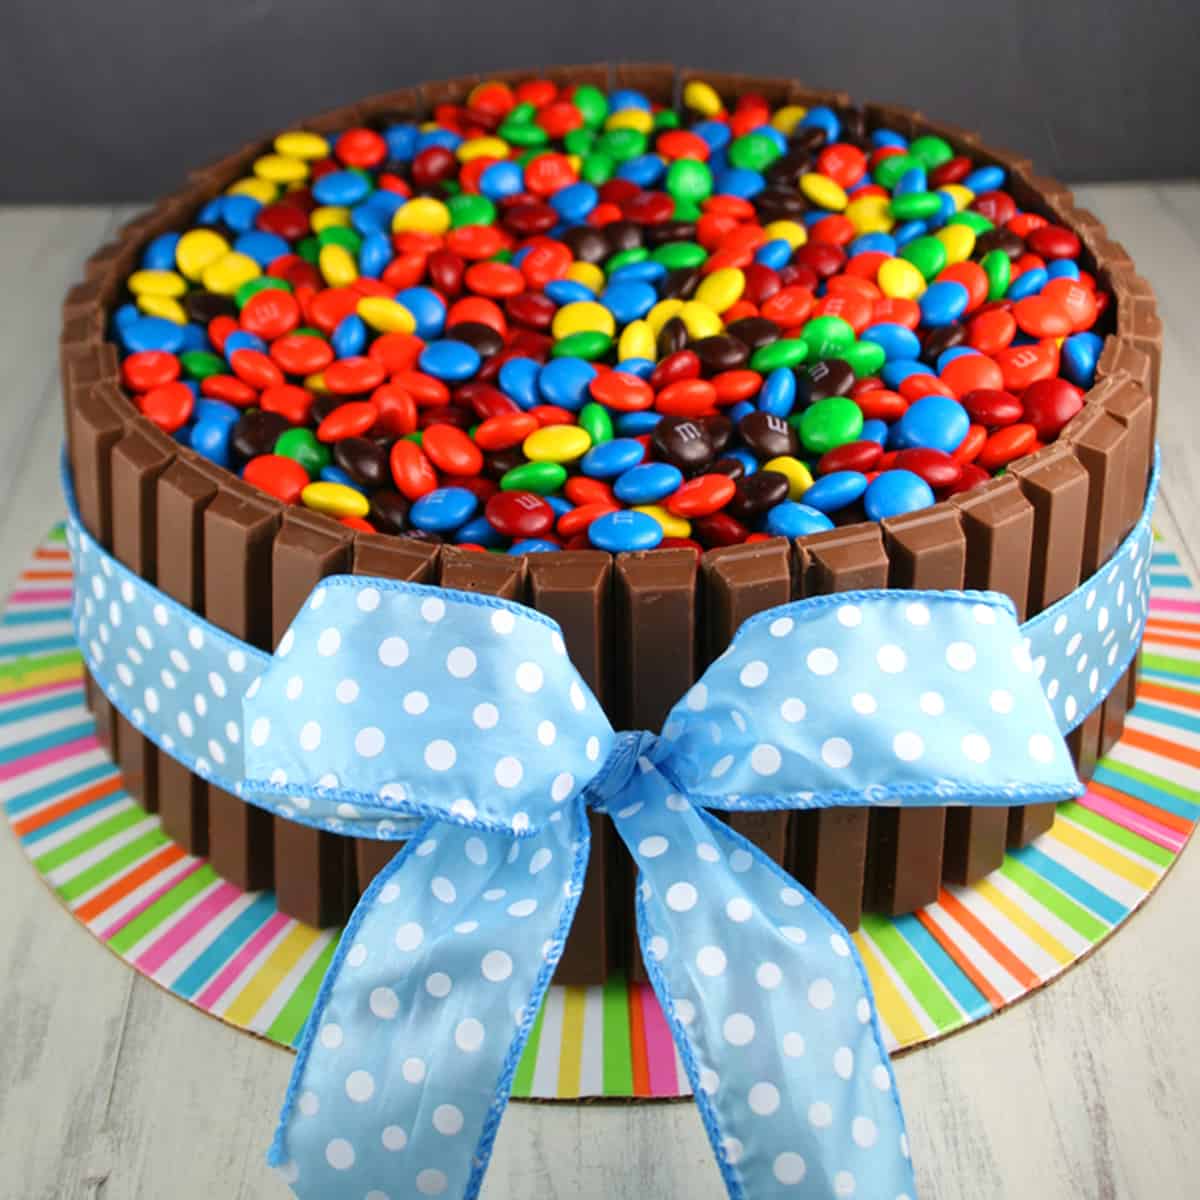 Buttercream Iced 8 inch Cake covered with M&M's